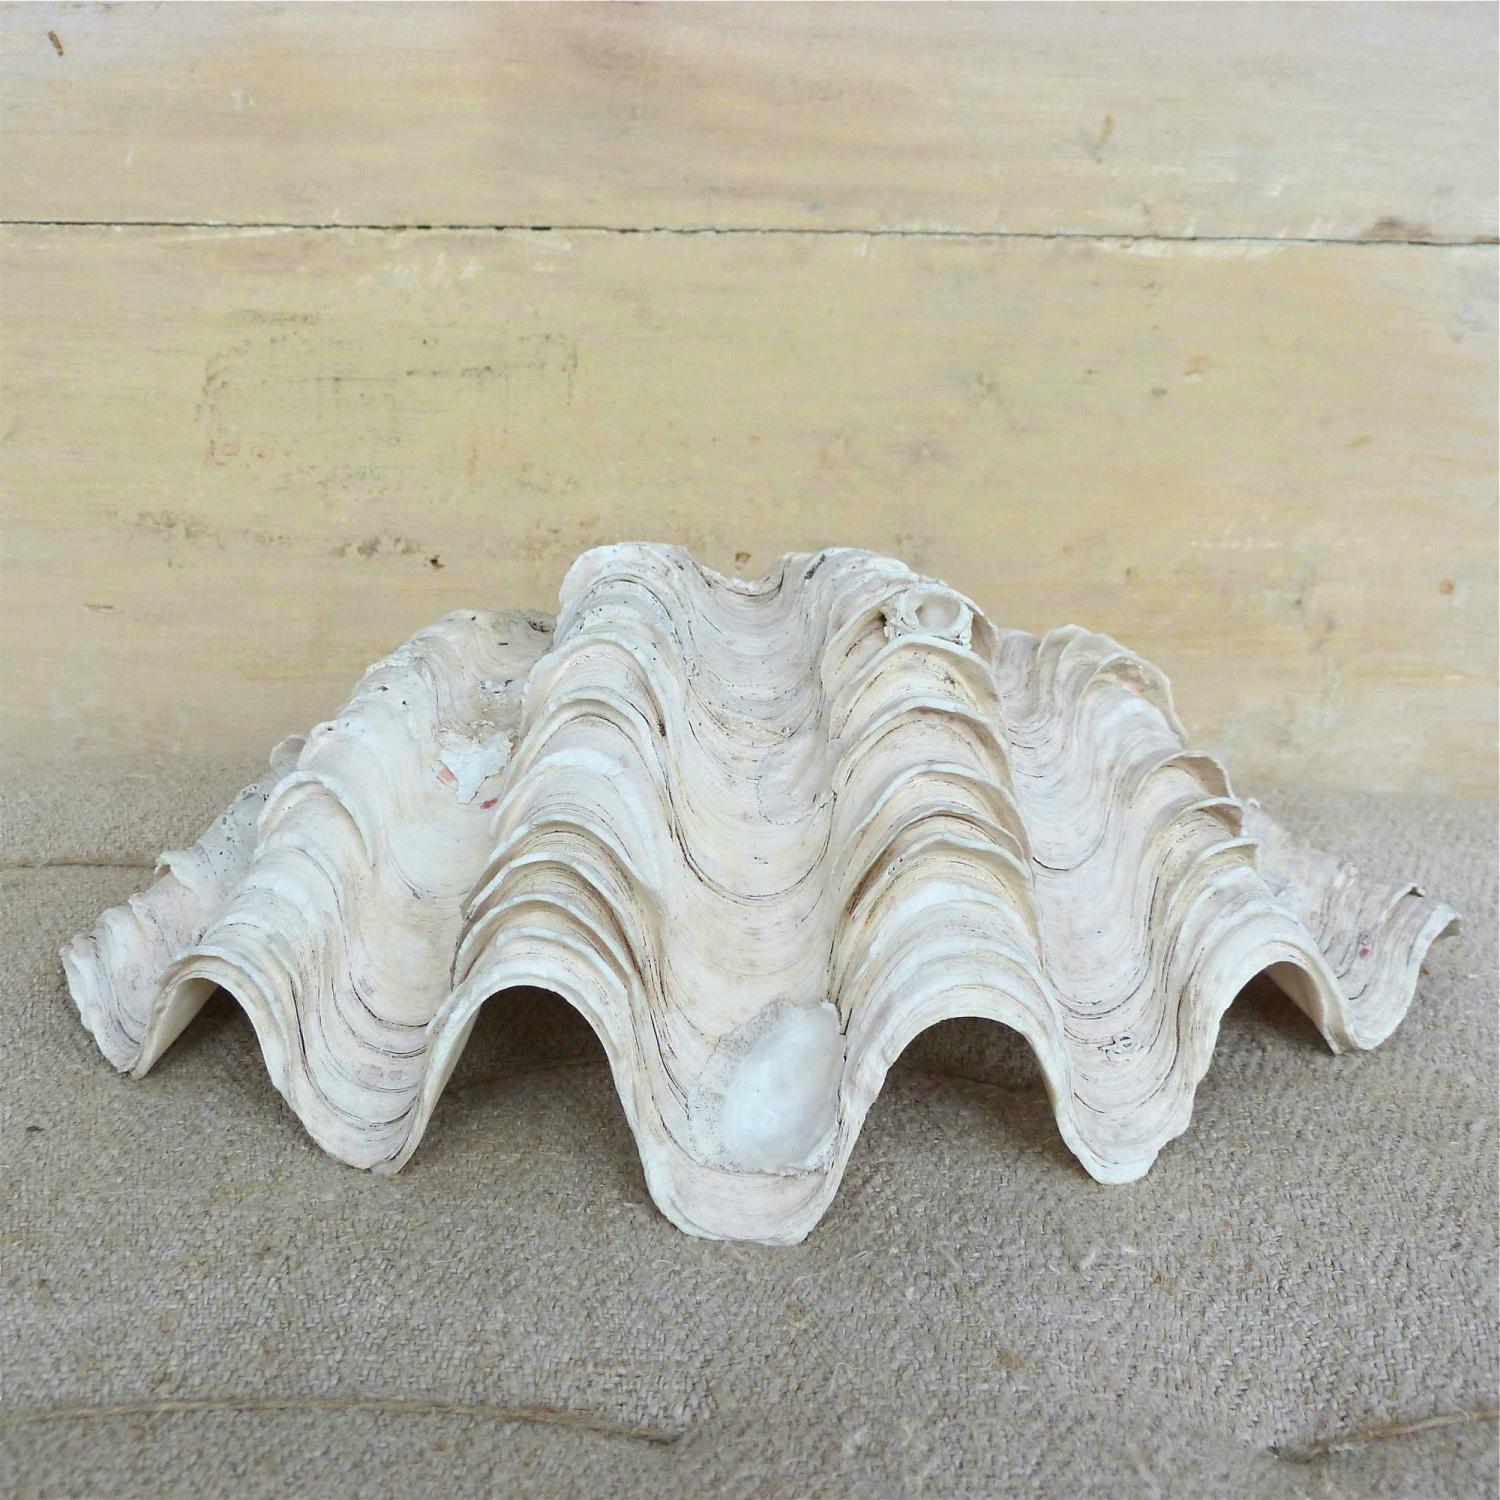 GIANT SOUTH PACIFIC CLAM SHELL